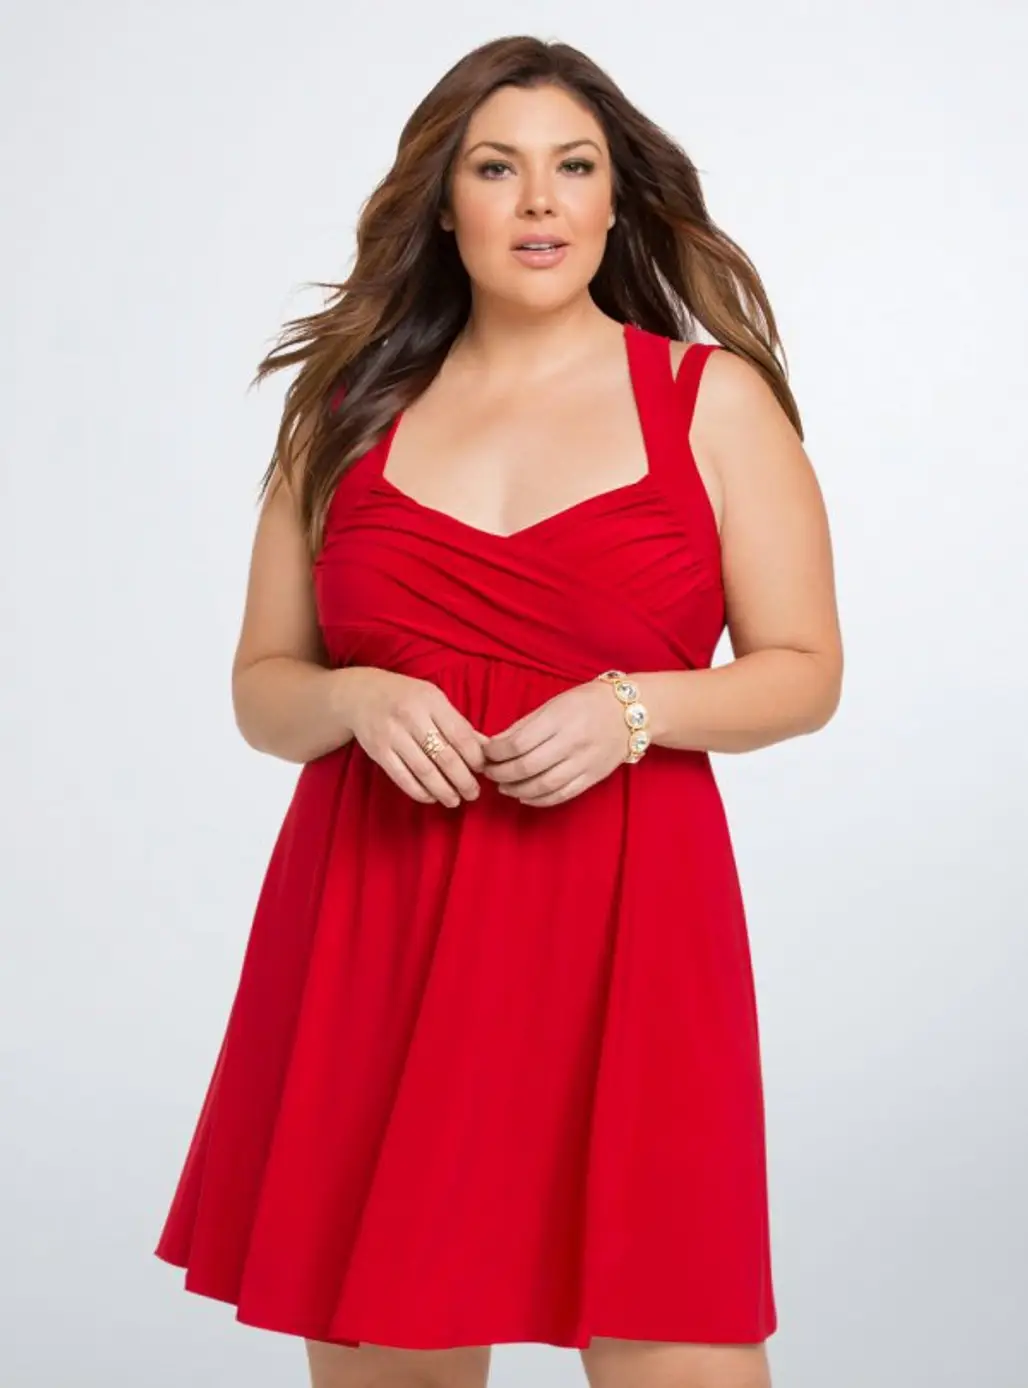 dress, clothing, day dress, red, woman,